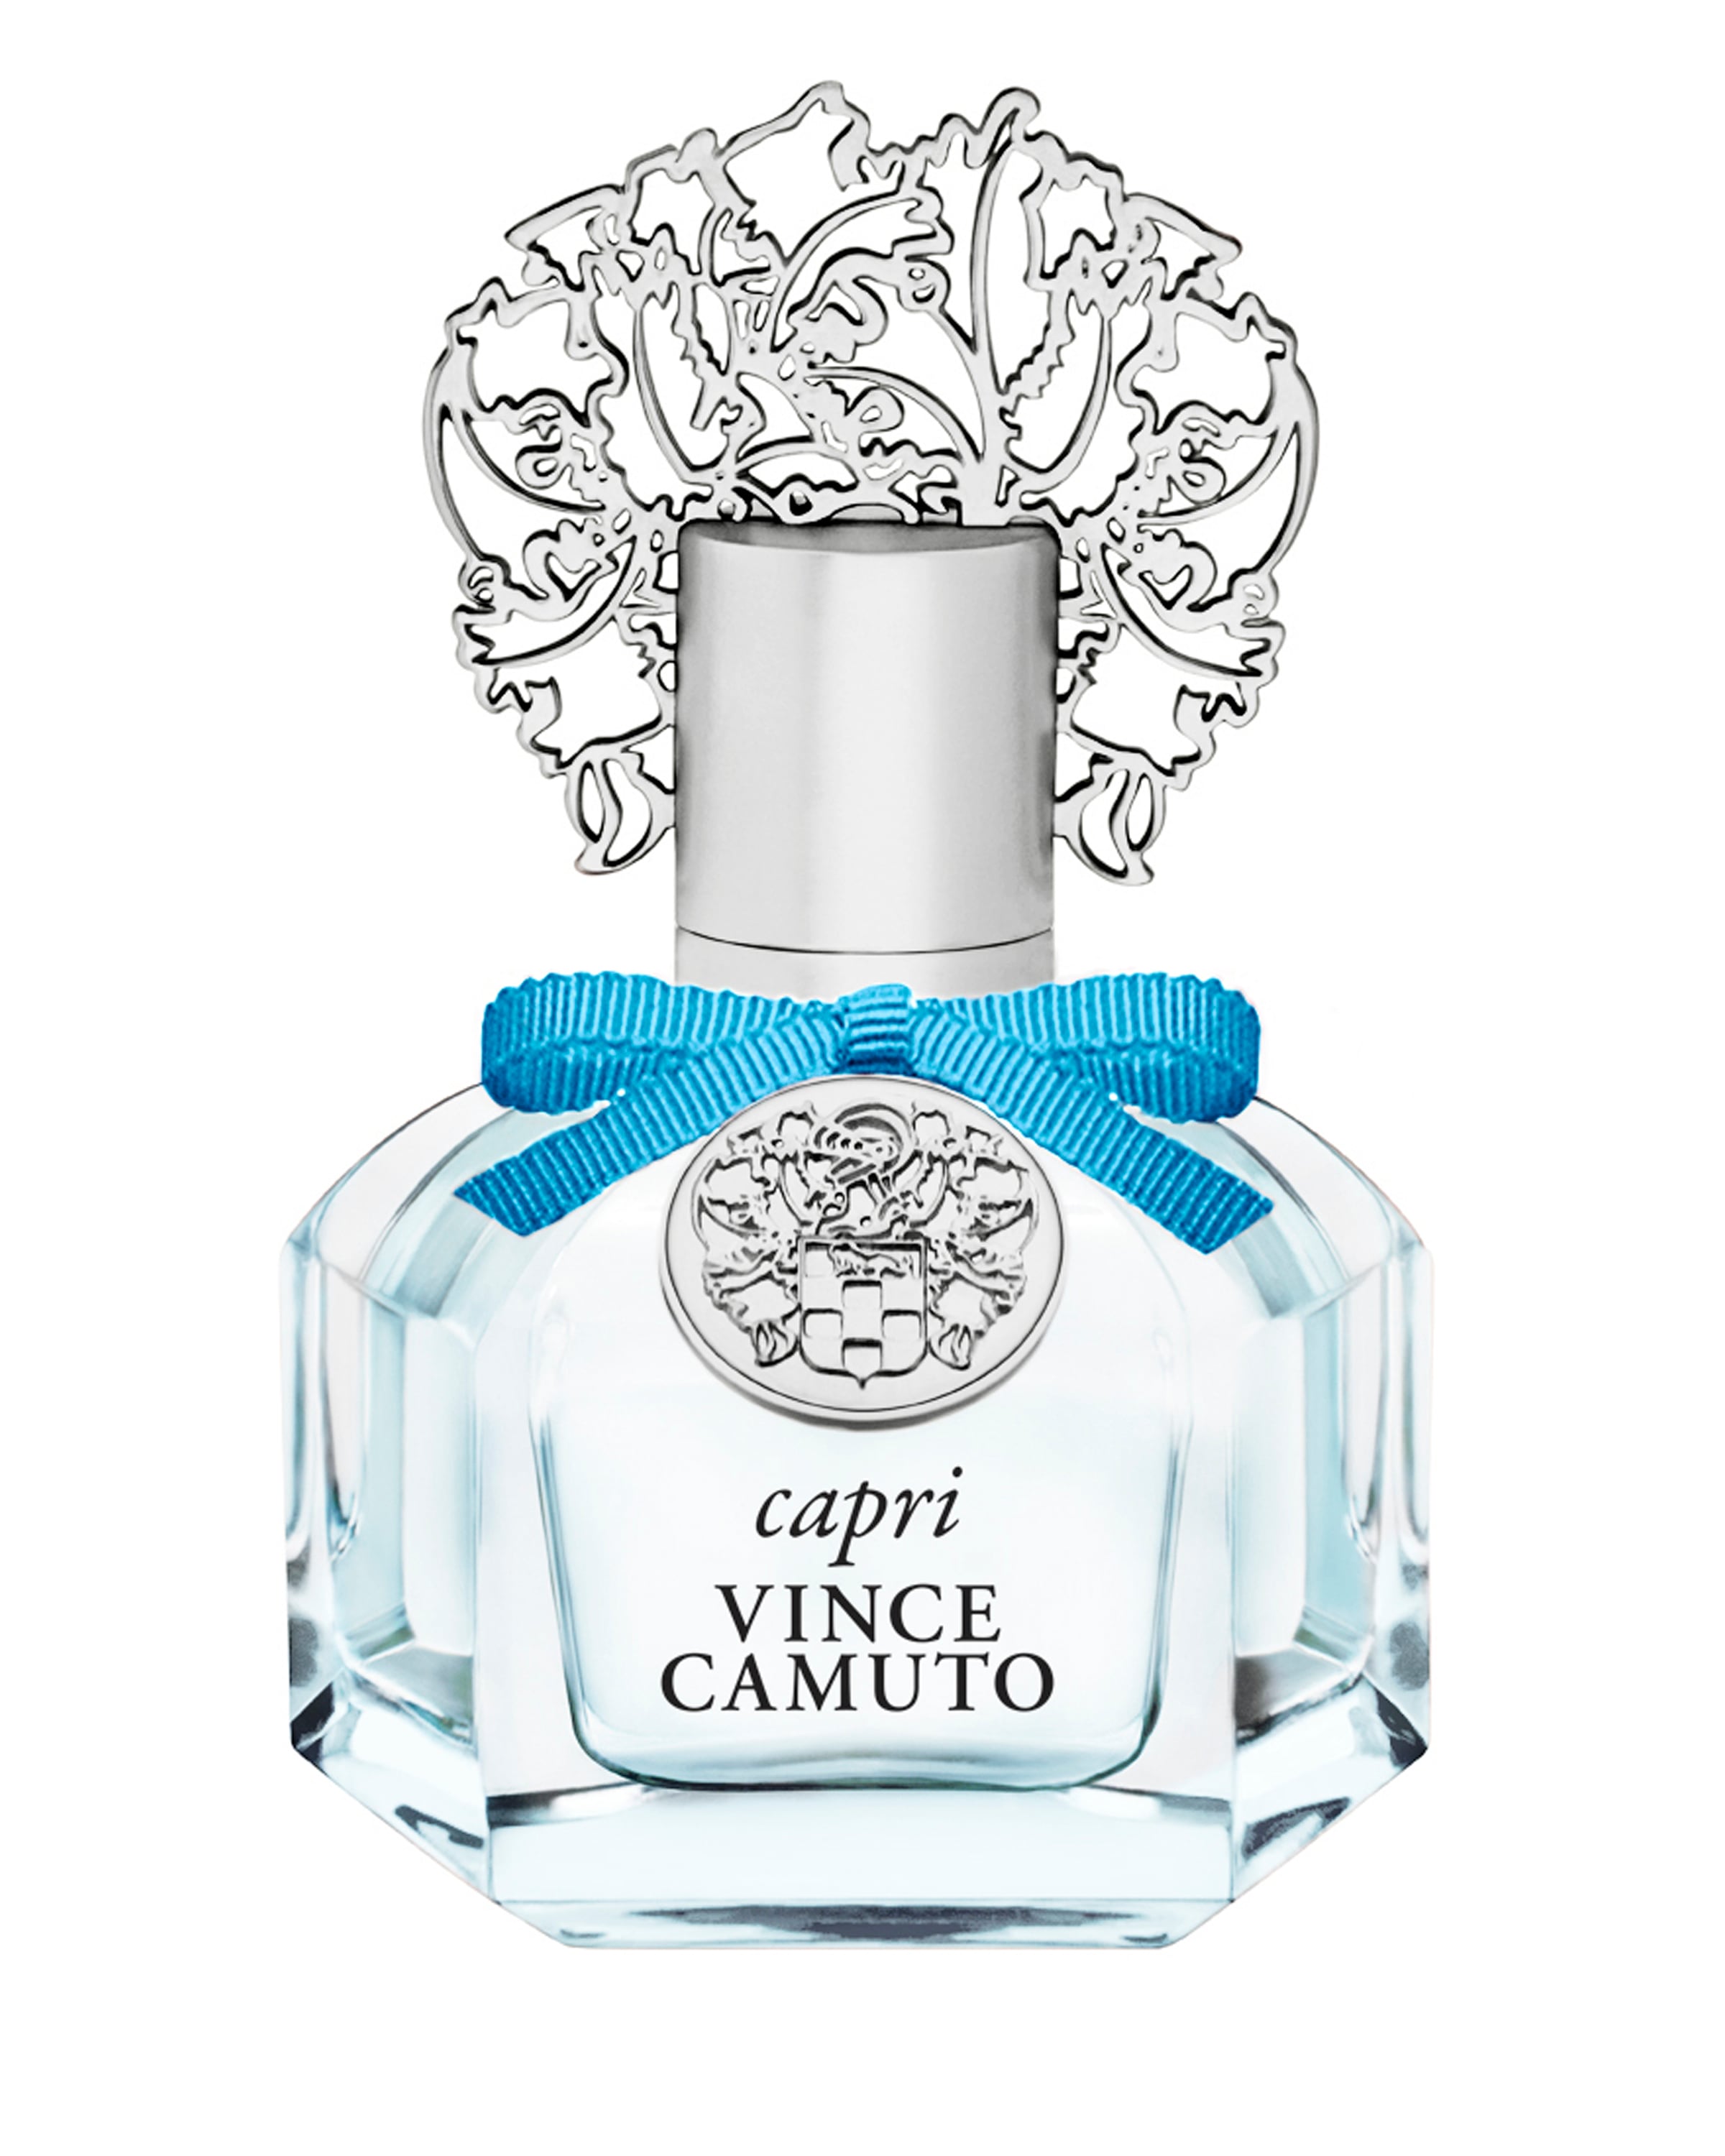 Best Vince Camuto Amore And Capri Perfume New for sale in Hillsboro, Oregon  for 2024